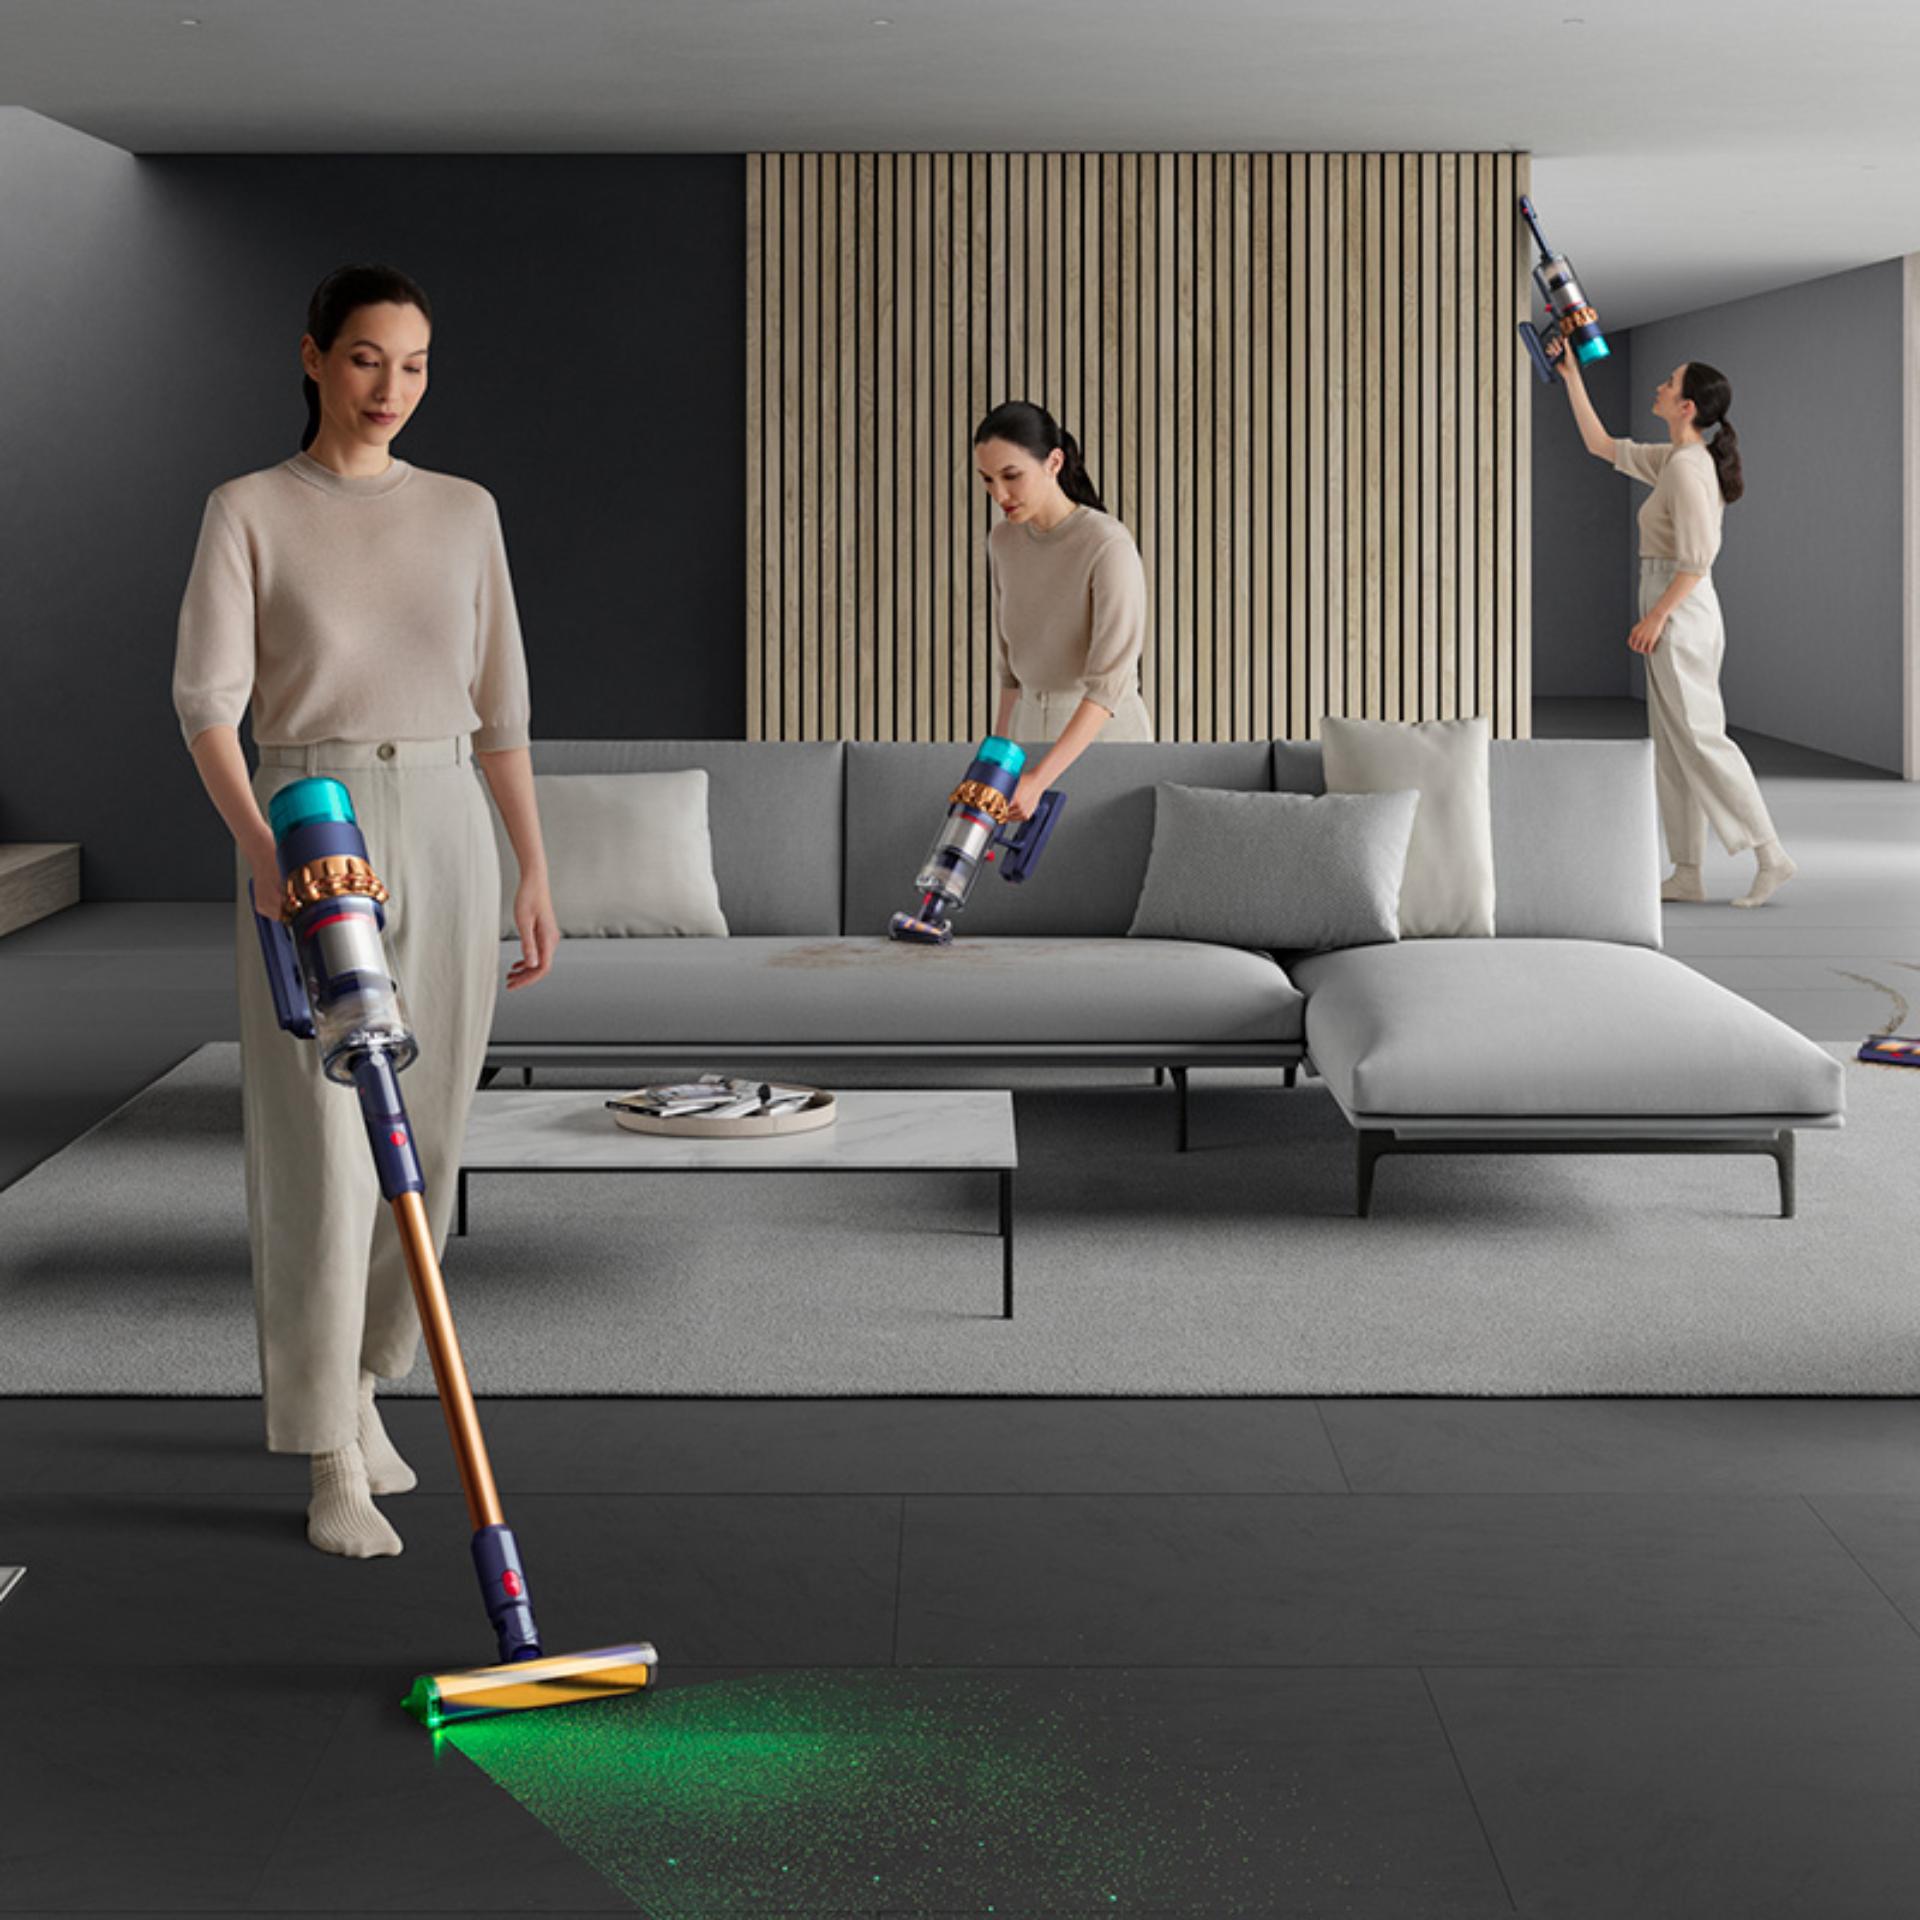 Woman shown using the Dyson Gen5detect as a stick and handheld vacuum around the home.